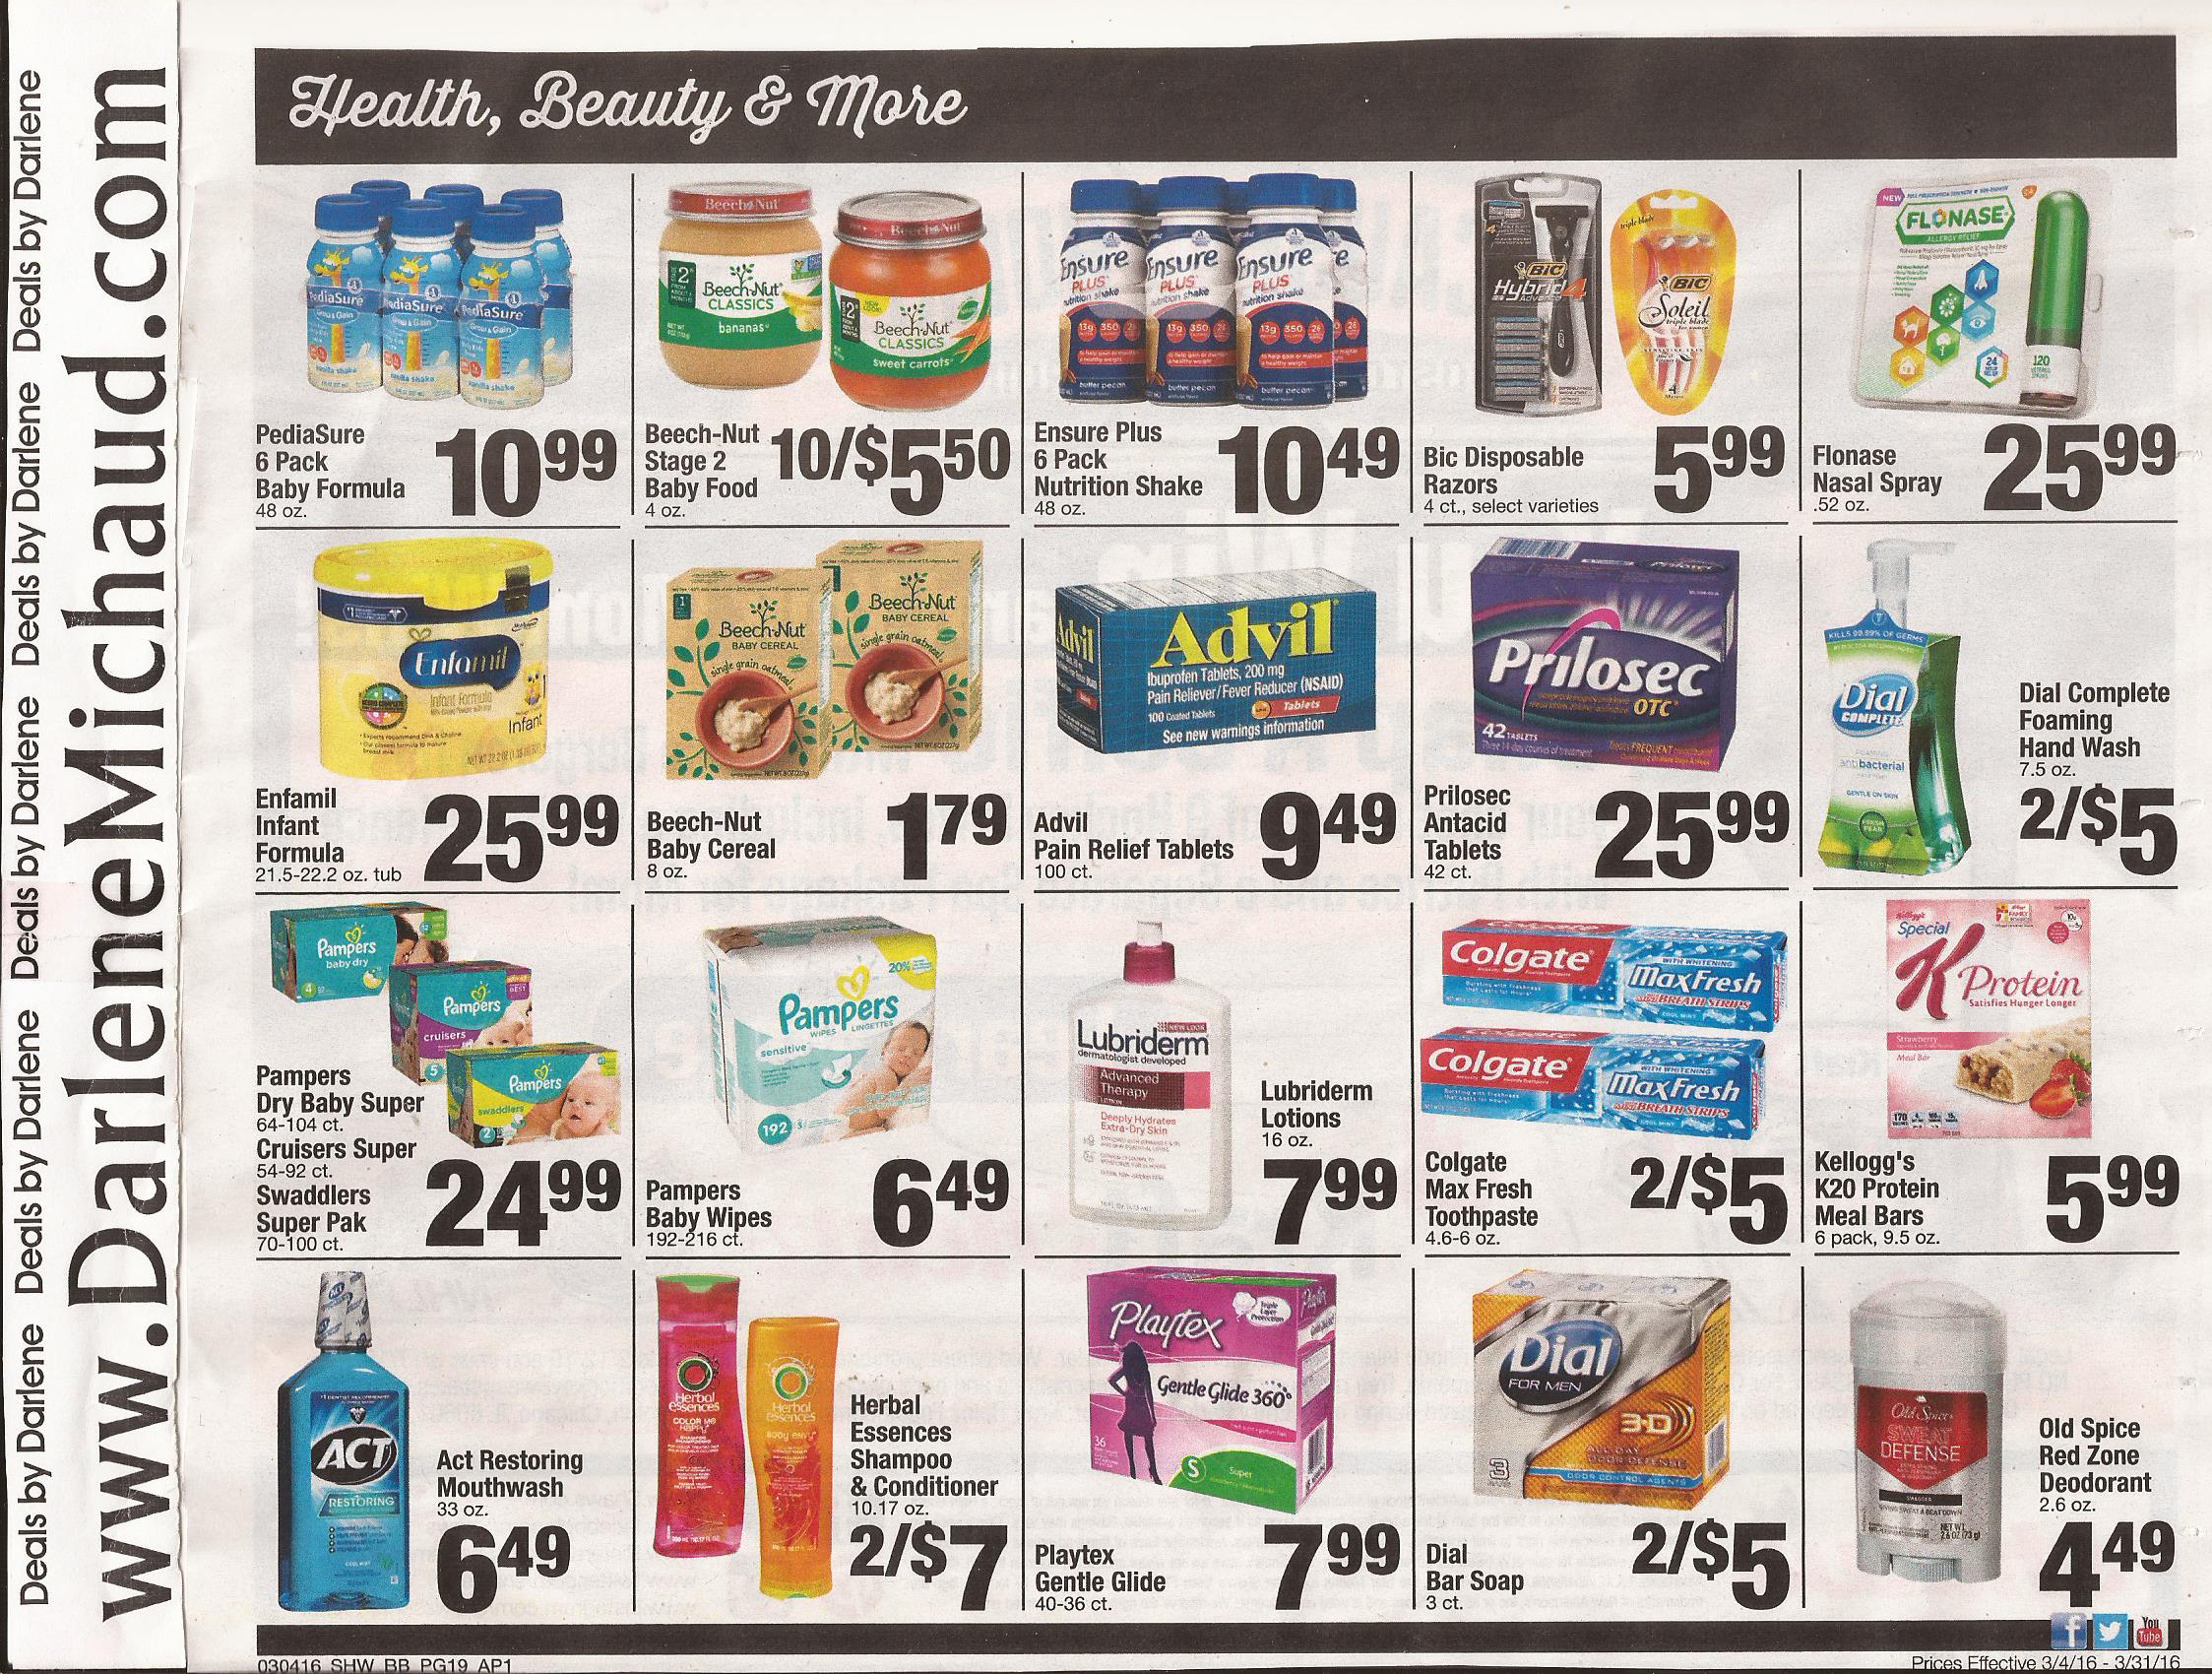 shaws-big-book-savings-march-4-march-31-page-19